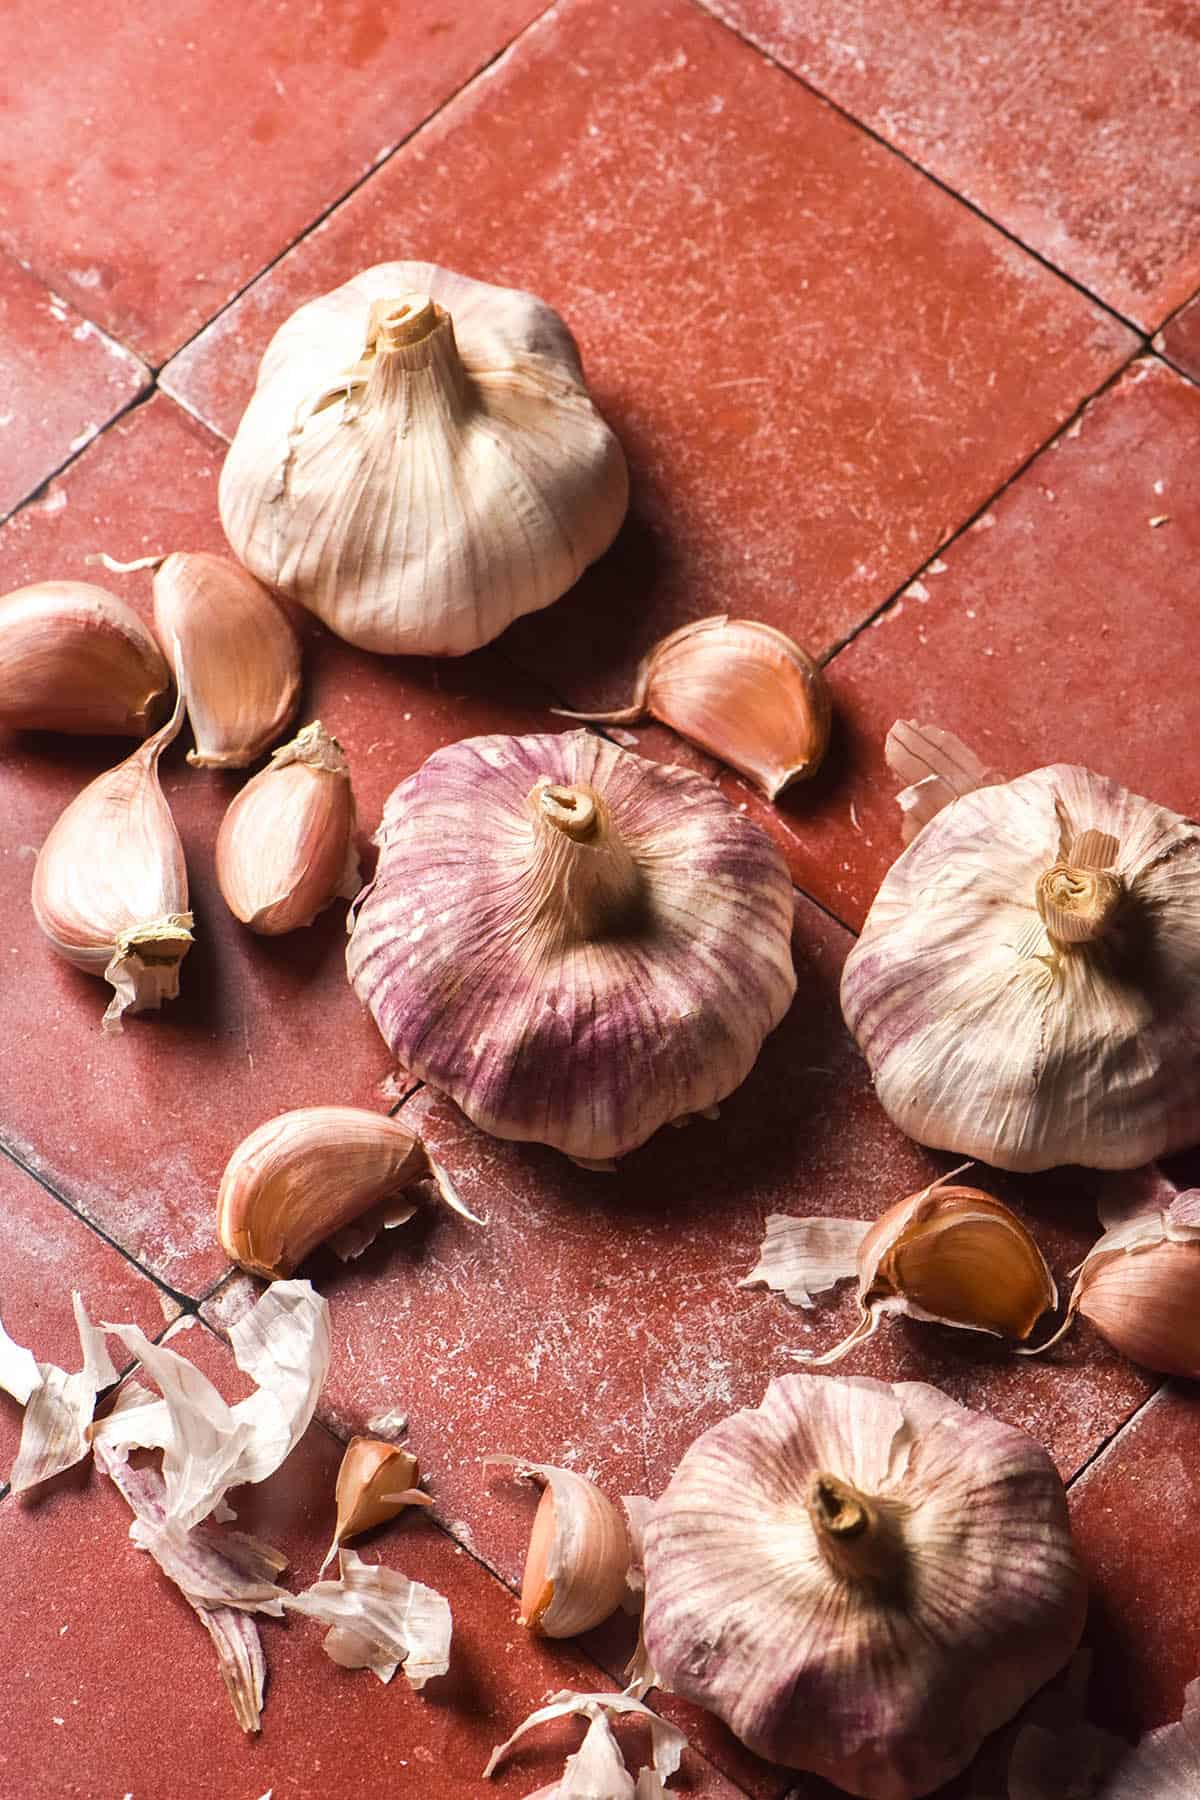 An aerial image of purple and white heads and cloves of garlic arranged casually on a terracotta tile backdrop